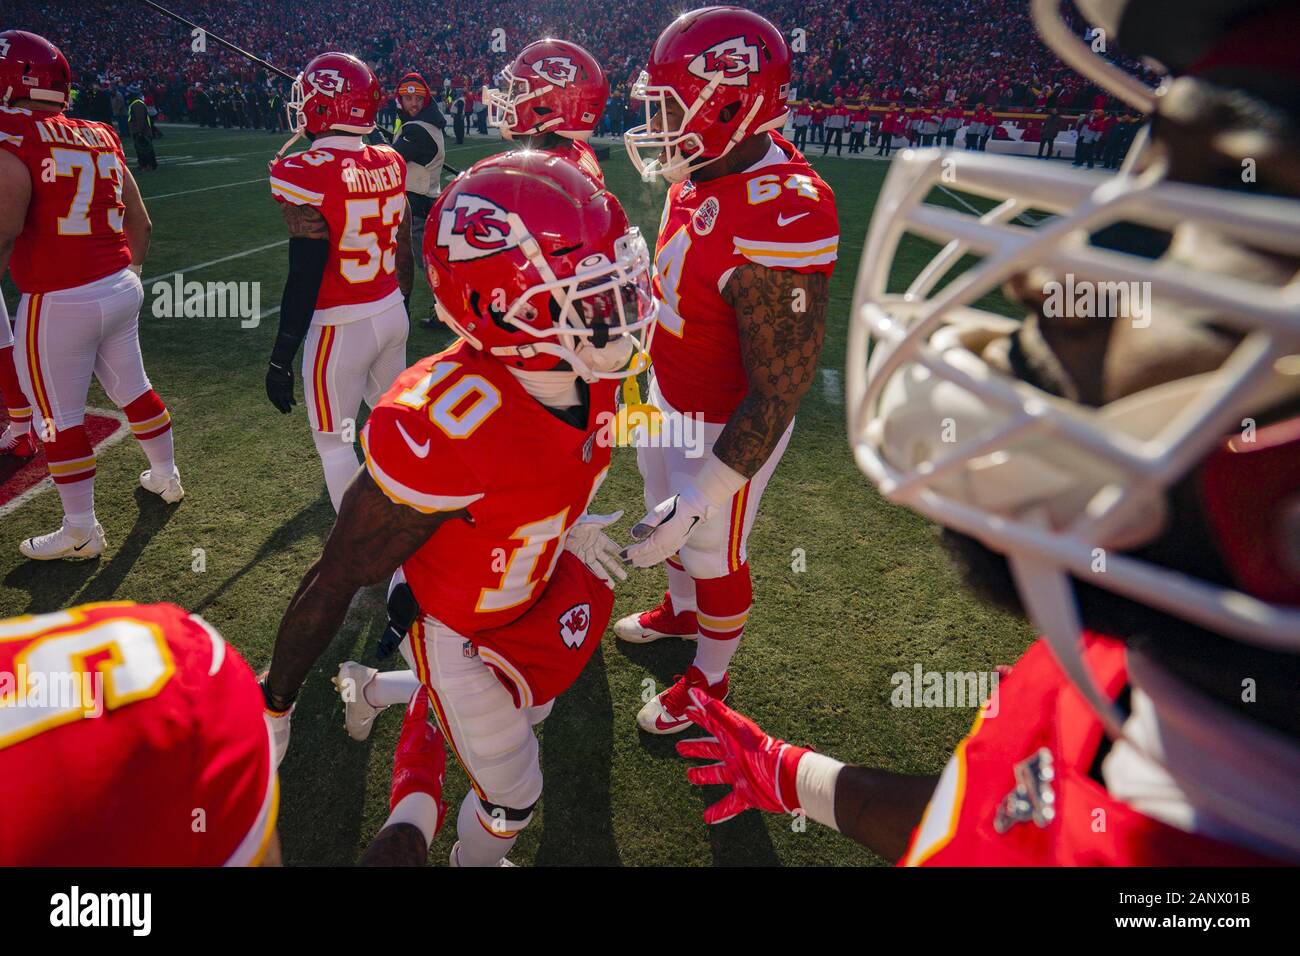 Chiefs vs. Titans AFC title game: Players of the Game for Kansas City